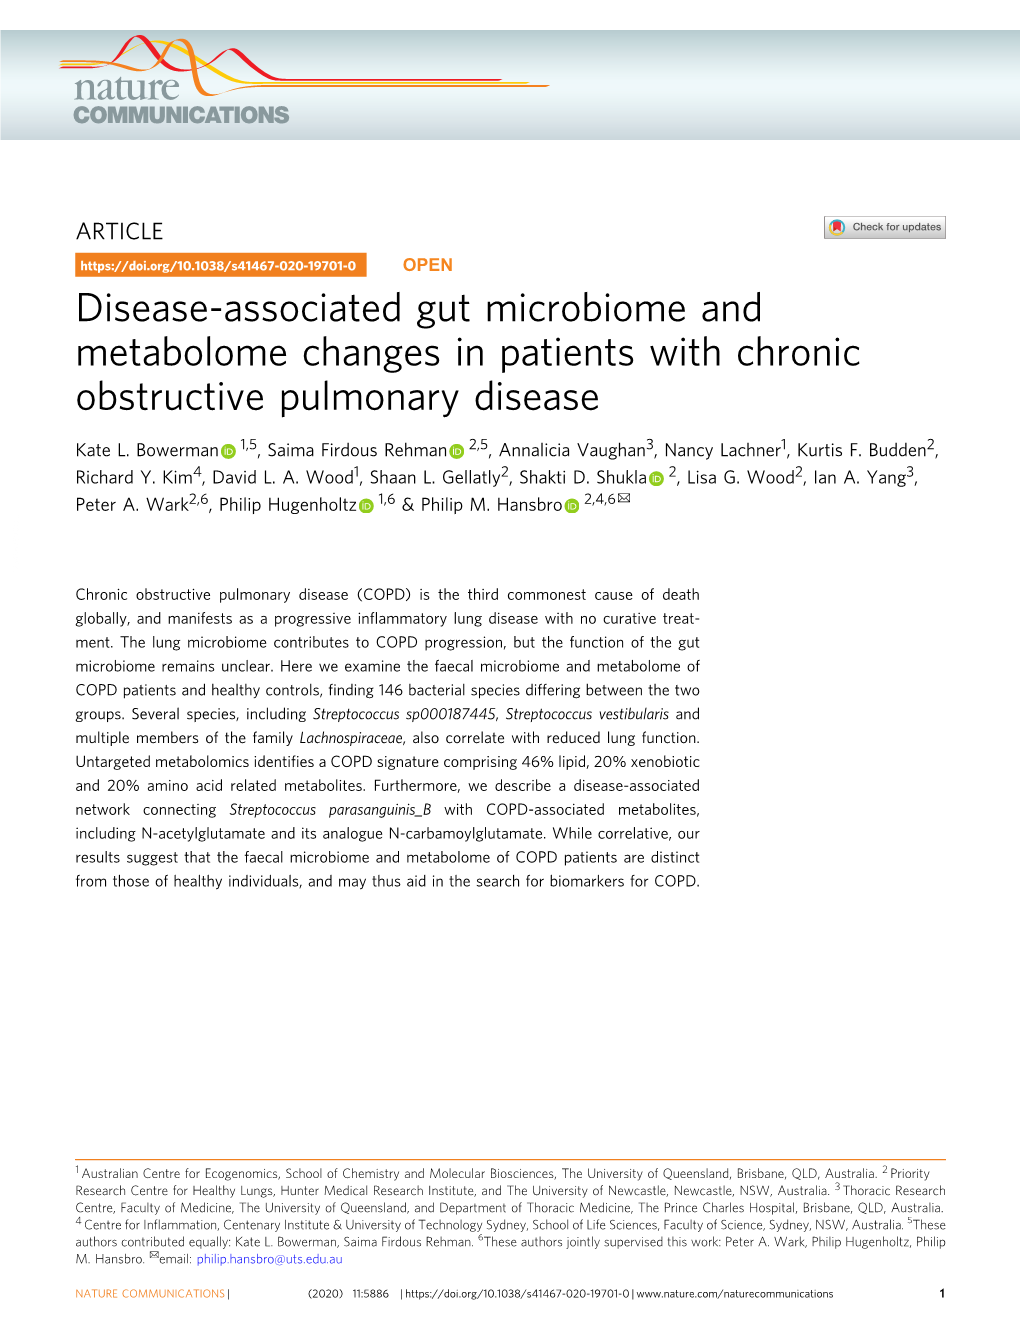 Disease-Associated Gut Microbiome and Metabolome Changes in Patients with Chronic Obstructive Pulmonary Disease